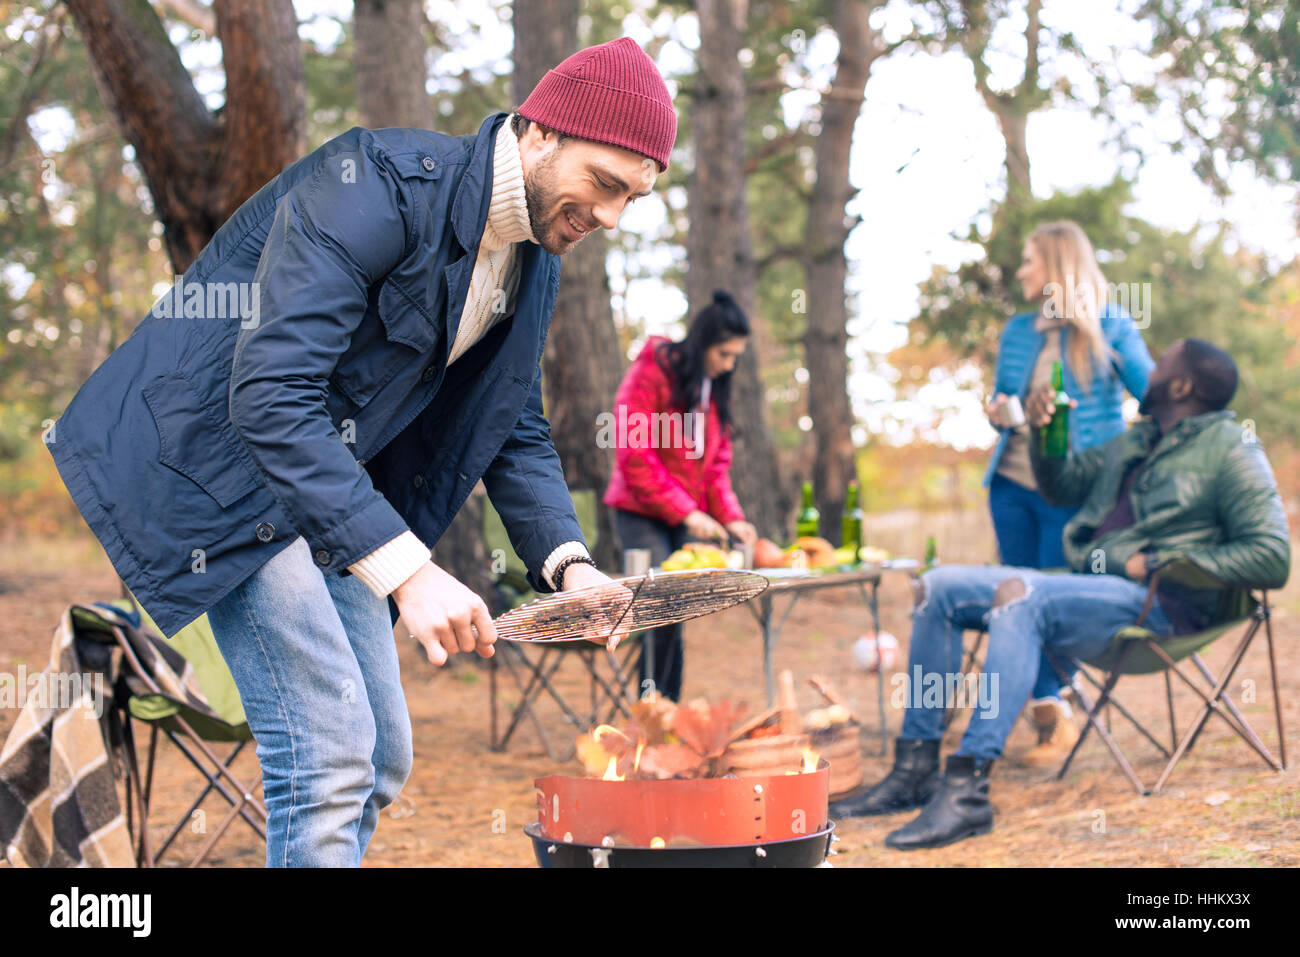 Man kindling fire on grill Stock Photo